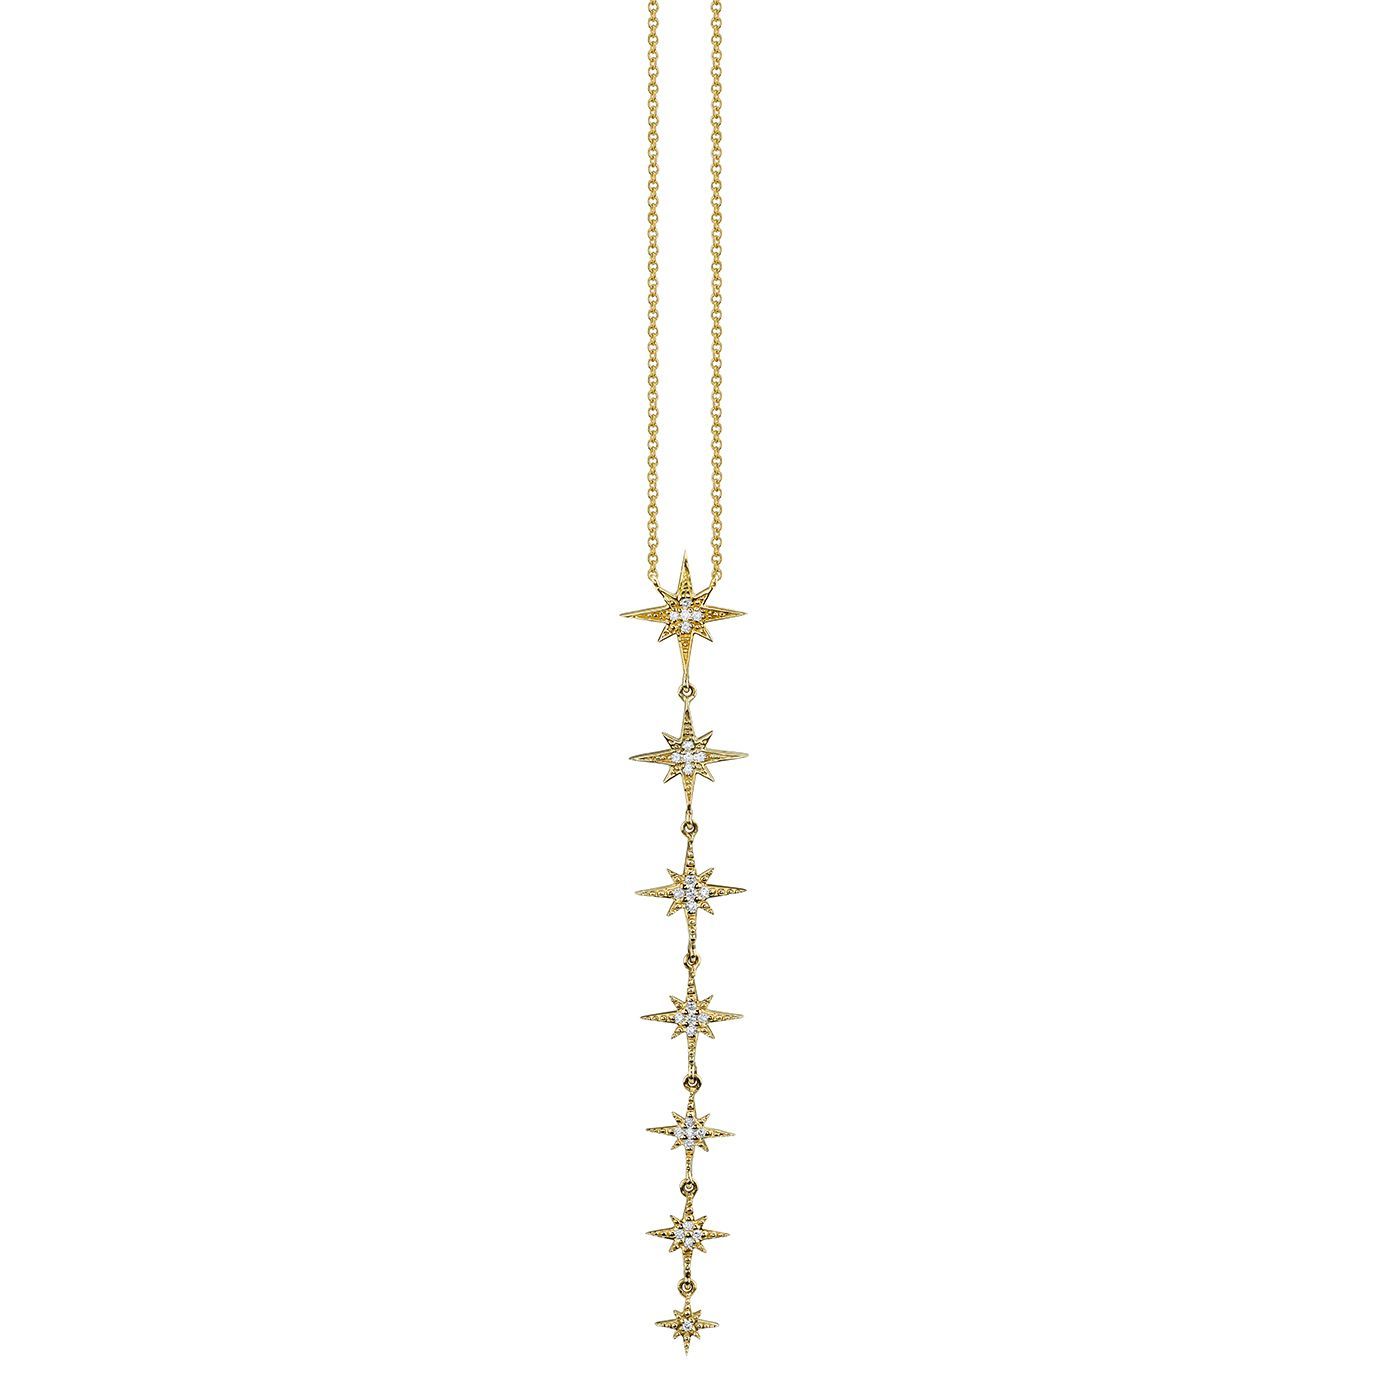 Yellow Gold & Diamond Pave Starburst Lariat Necklace Regarding Best And Newest Lariat Diamond Necklaces (View 20 of 25)